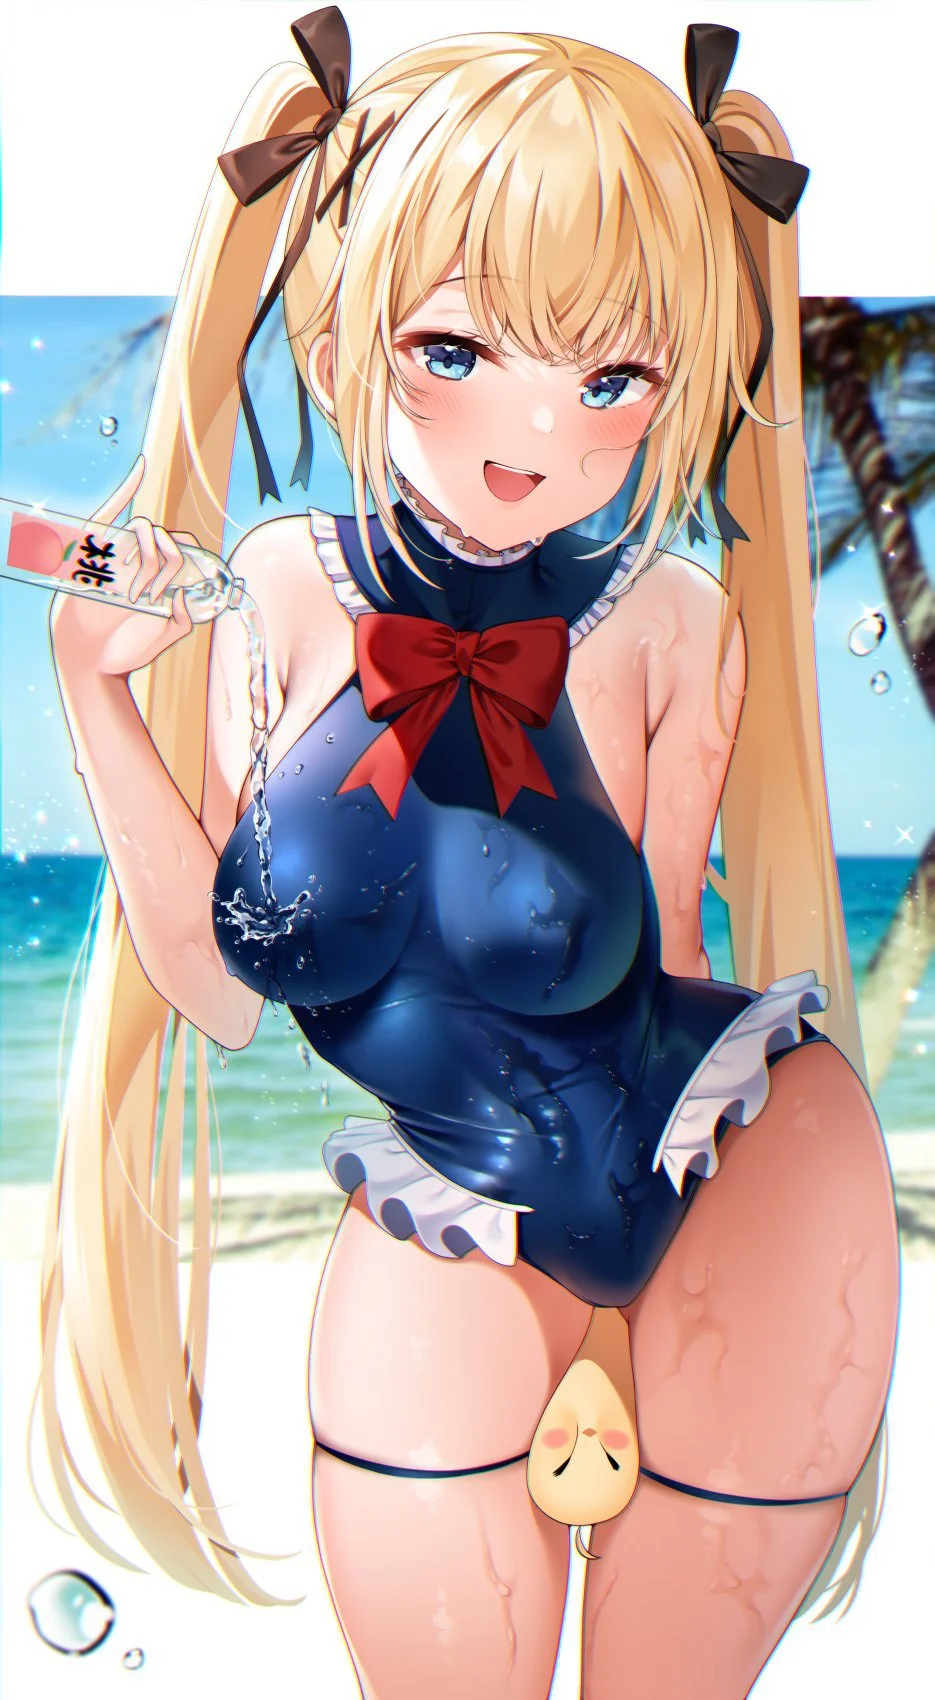 How much do you know about marie rose?